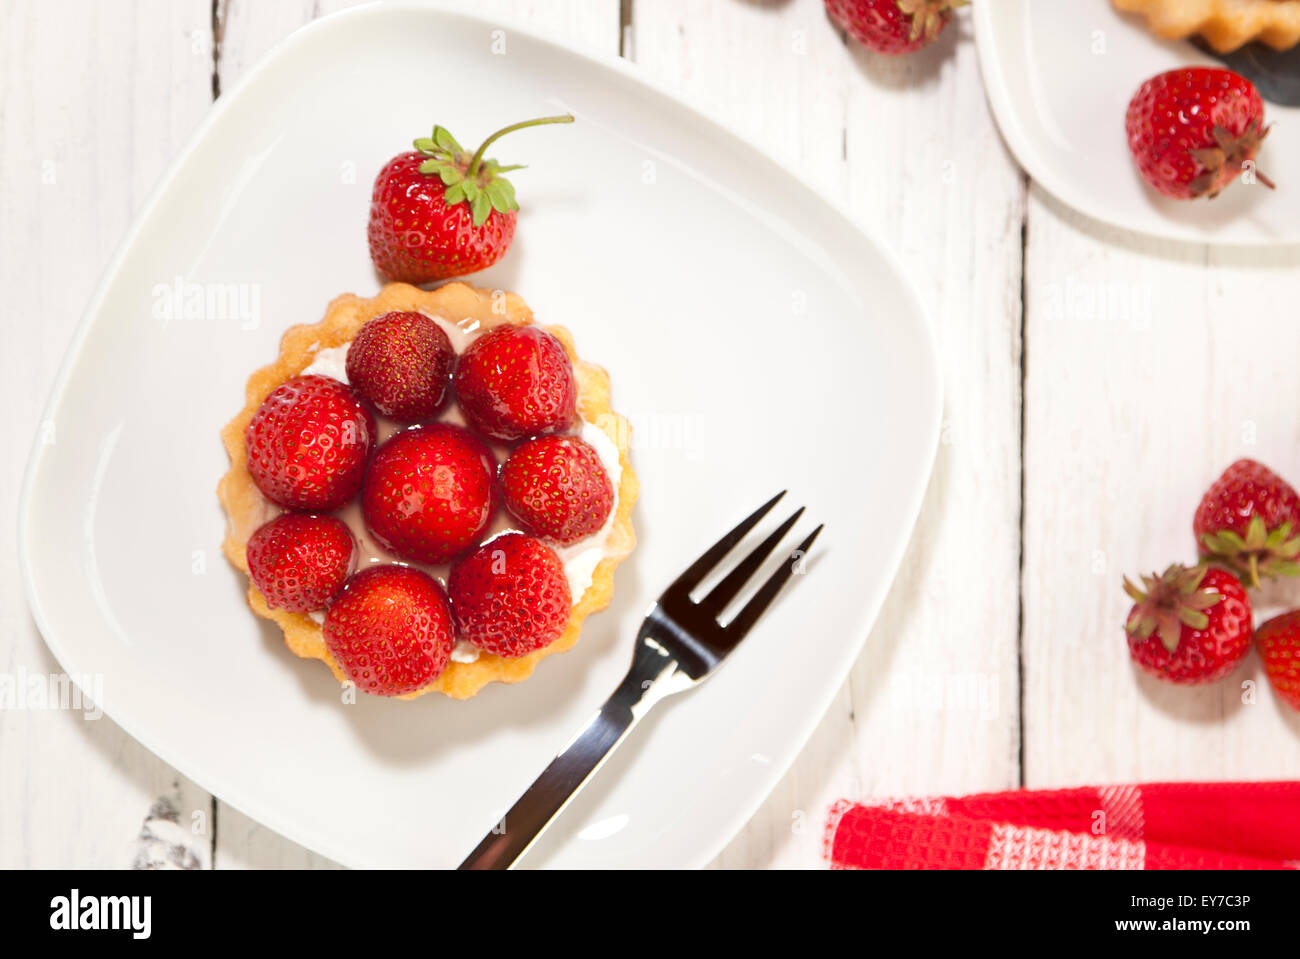 Strawberry shortcake on wooden coffee table, high angle view Stock Photo